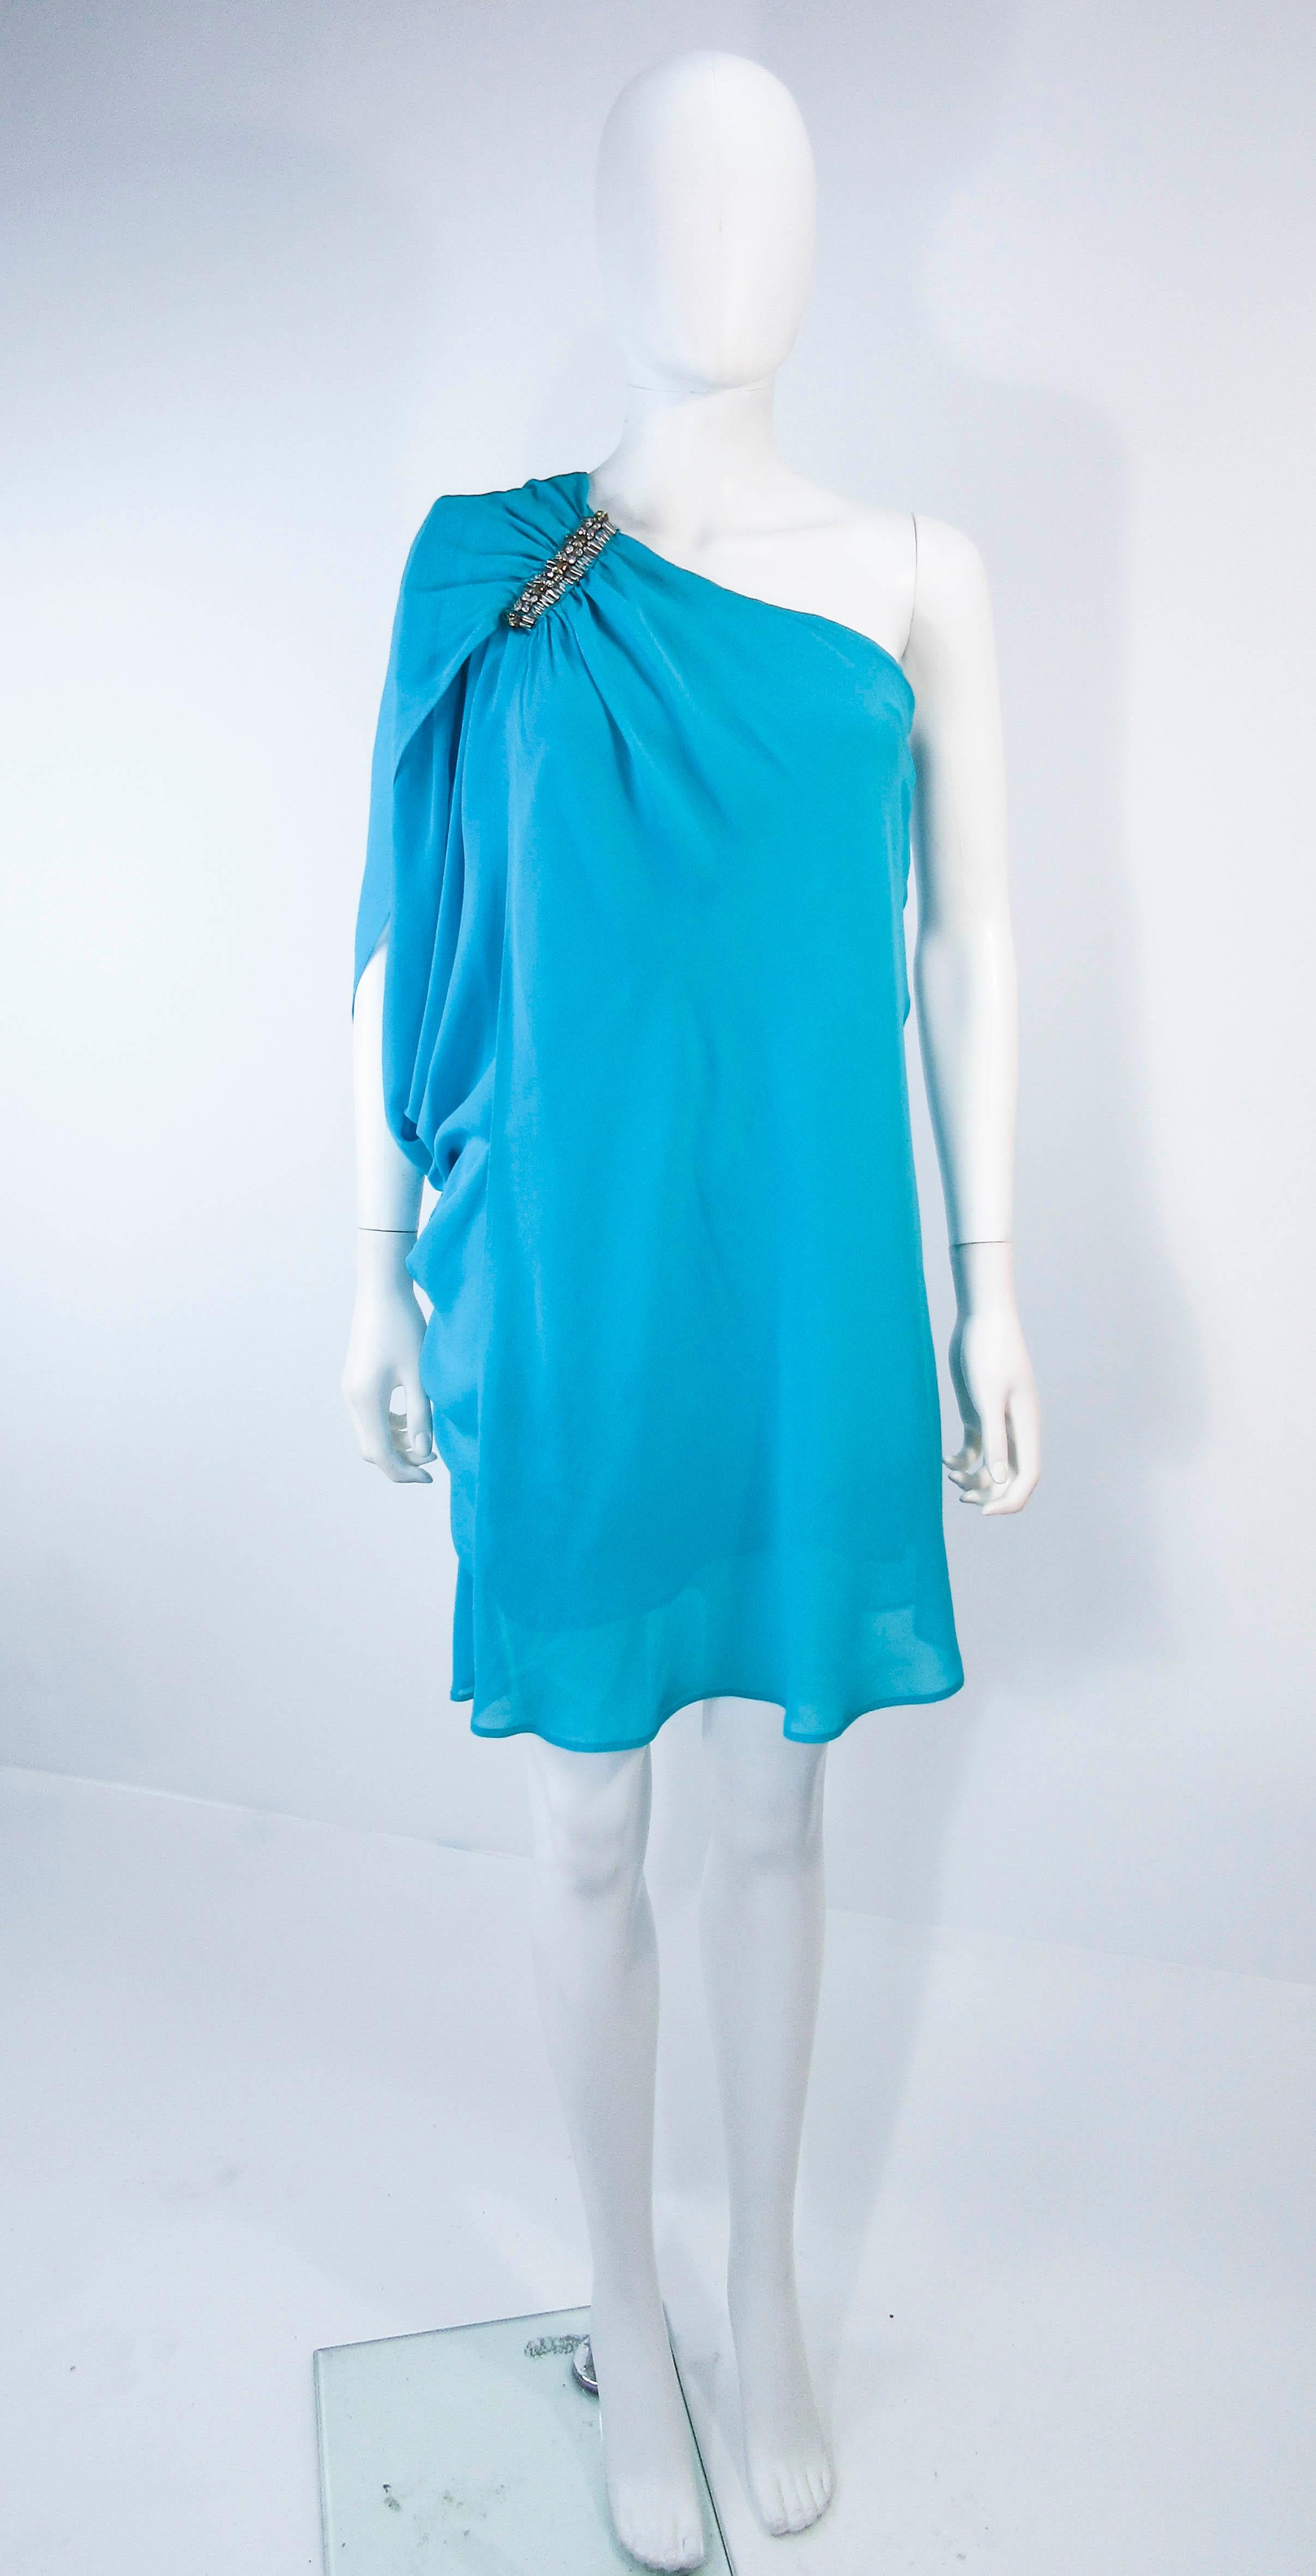 This Roberto Cavalli dress is composed of a aqua silk chiffon. Features an asymmetrical one shoulder design with beaded applique. There is a side zipper closure. In excellent pre-owned condition, some wear and a pull (see photos). 

**Please